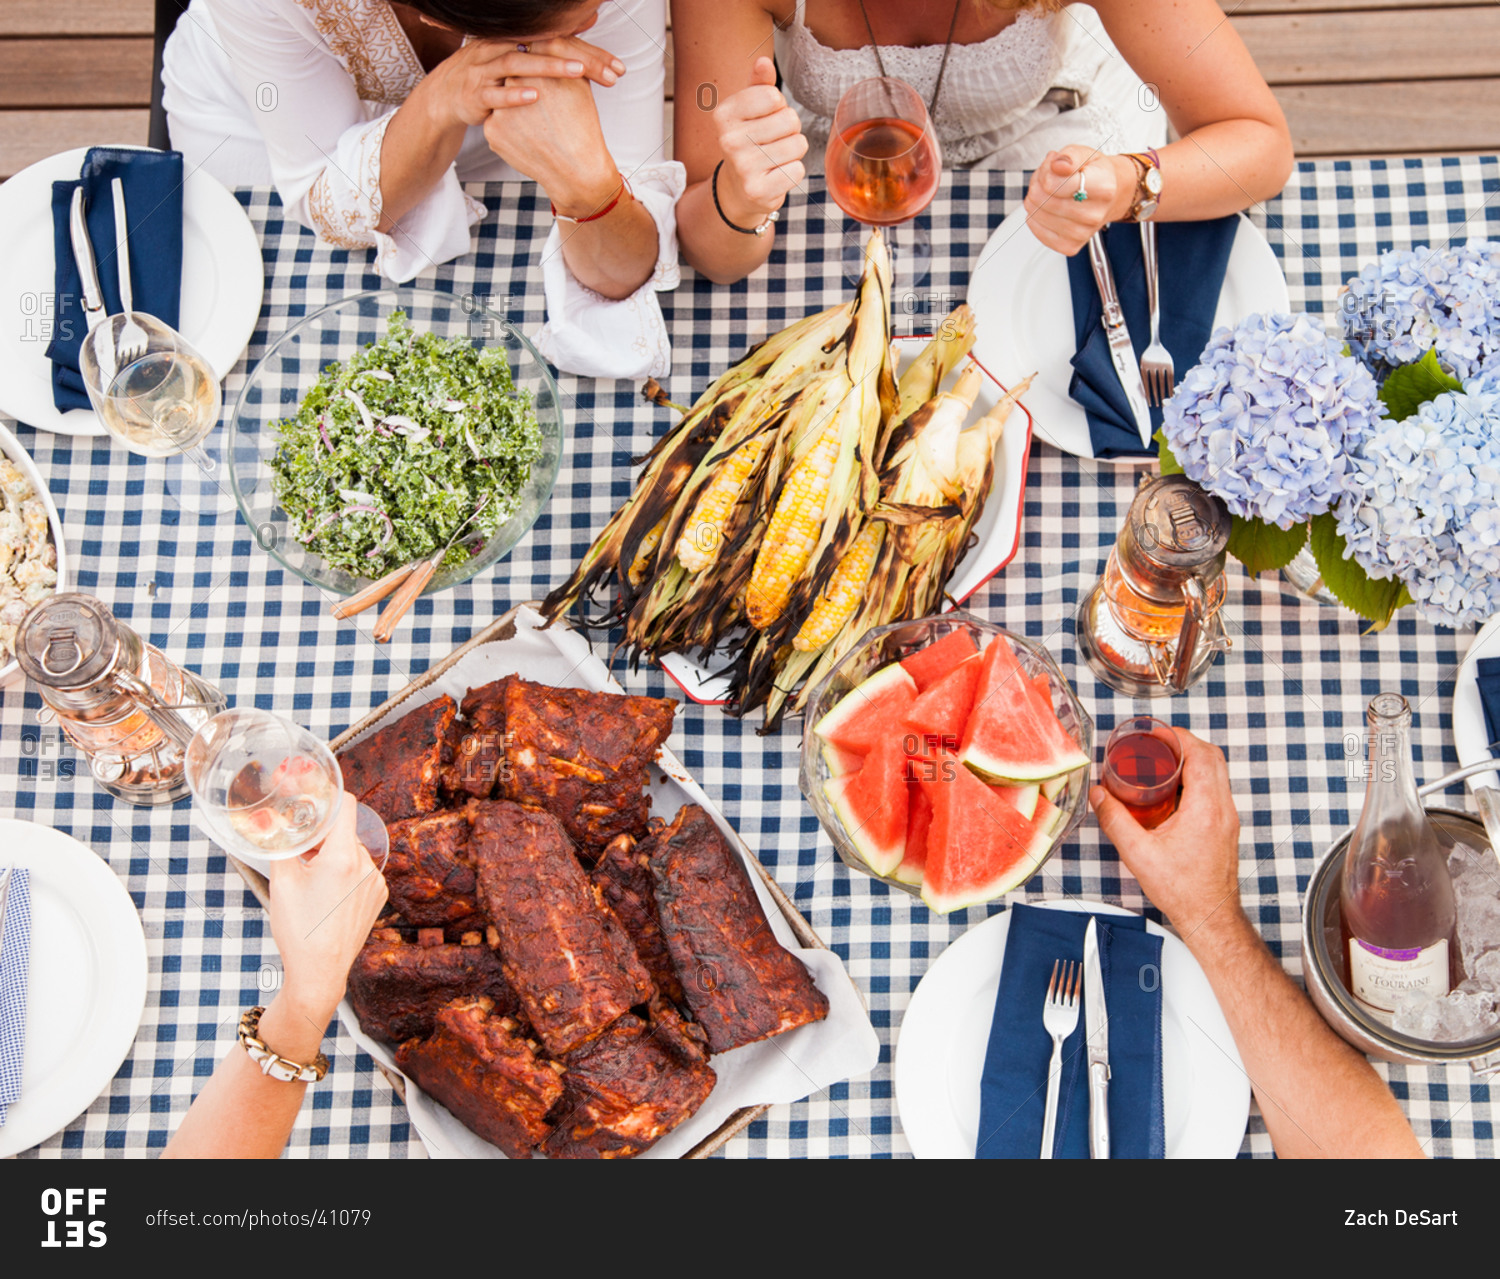 Overhead shot showing young Caucasian friends having barbeque party outdoors